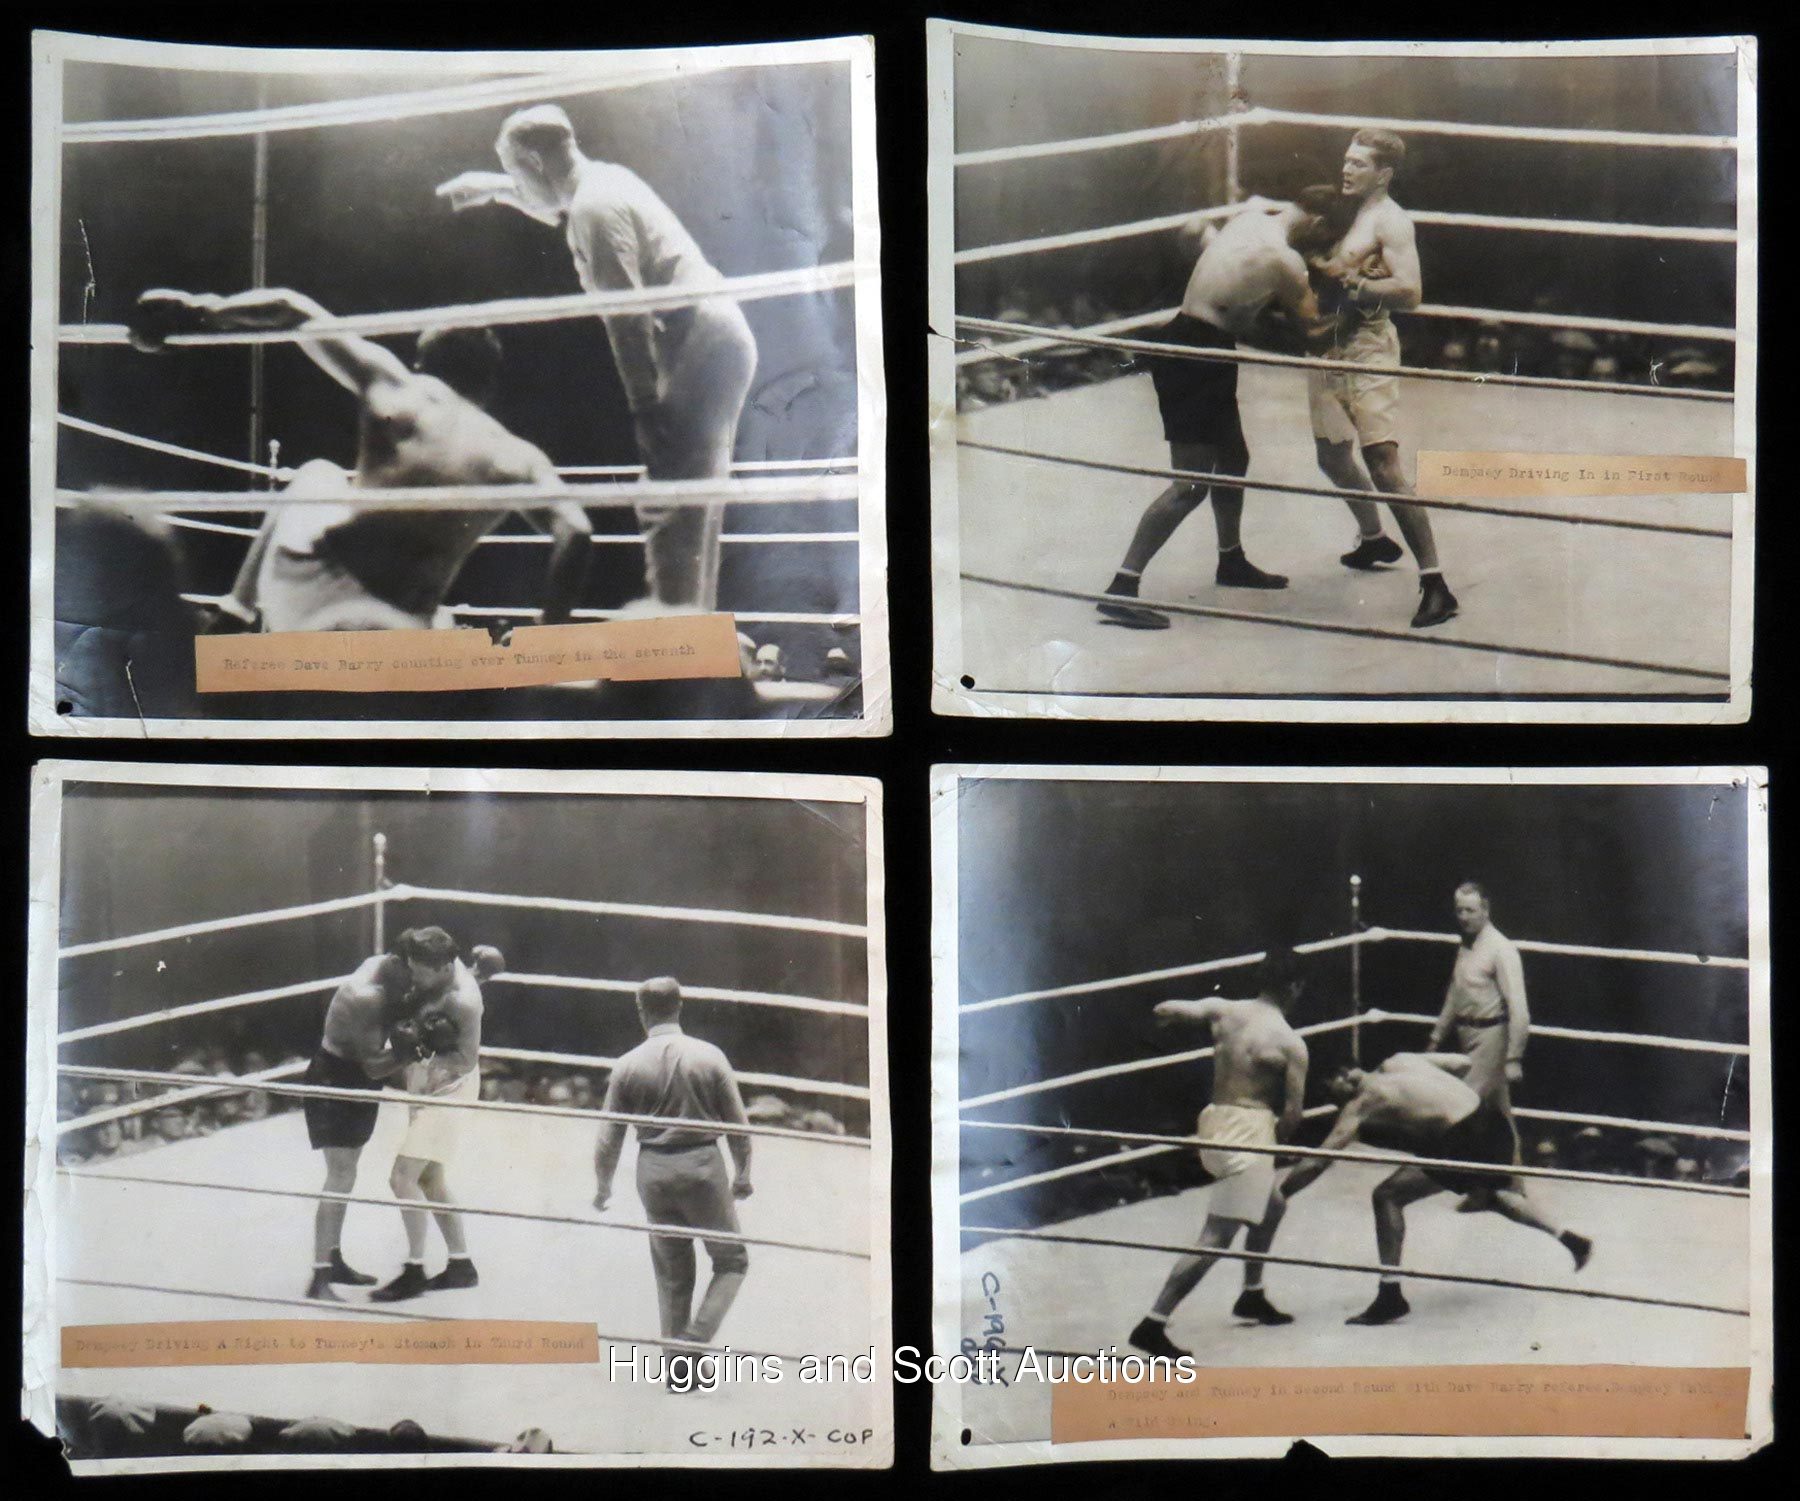 Dempsey vs. Tunney II in 1927 (CLICK ON PHOTO TO VIEW FIGHT CLIP)